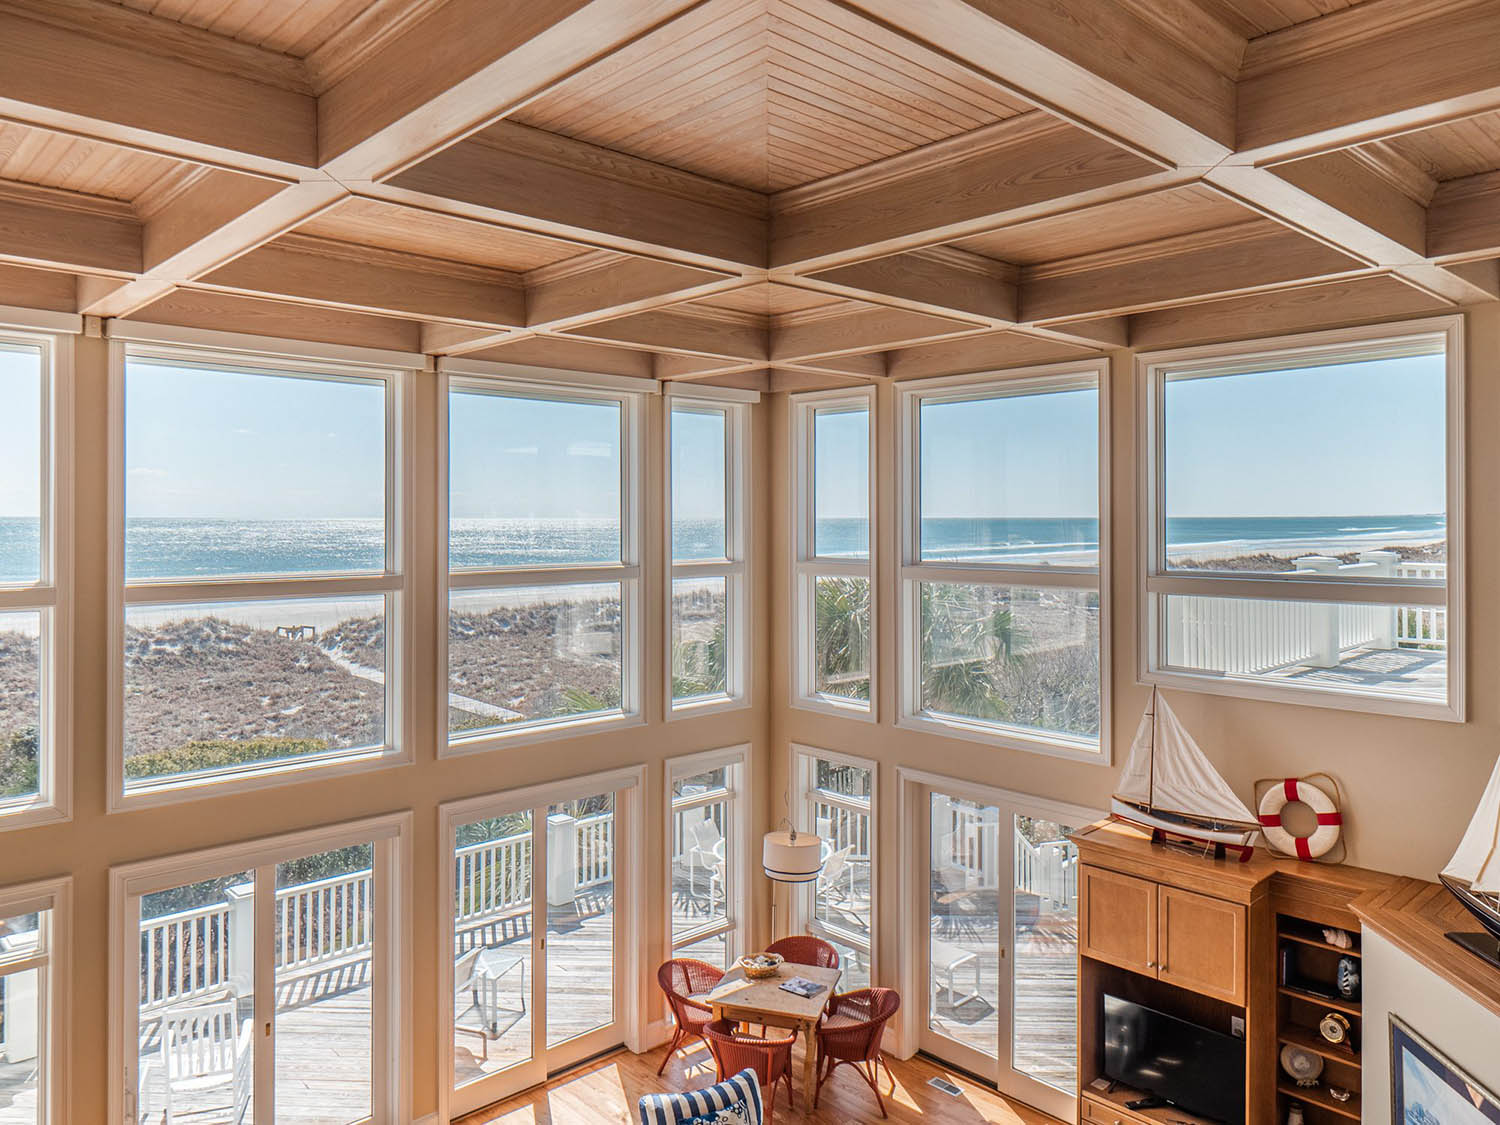 Ocean front beach house with cathedral ceilings, all tan wood with bead board coffers.